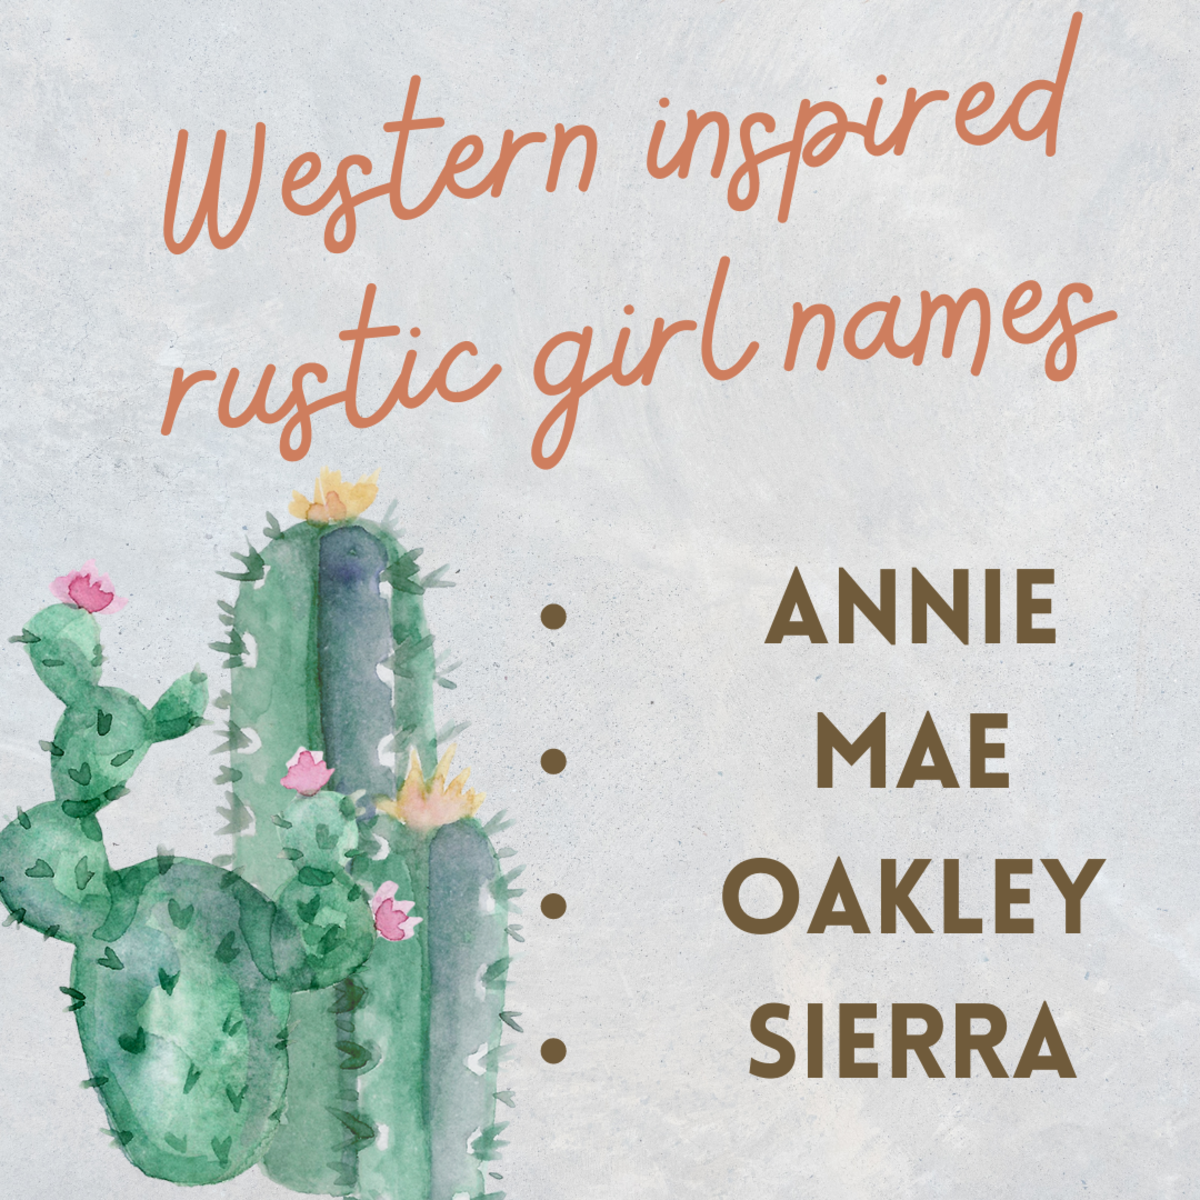 Rustic Folk and Country-Inspired Names for Girls - WeHaveKids